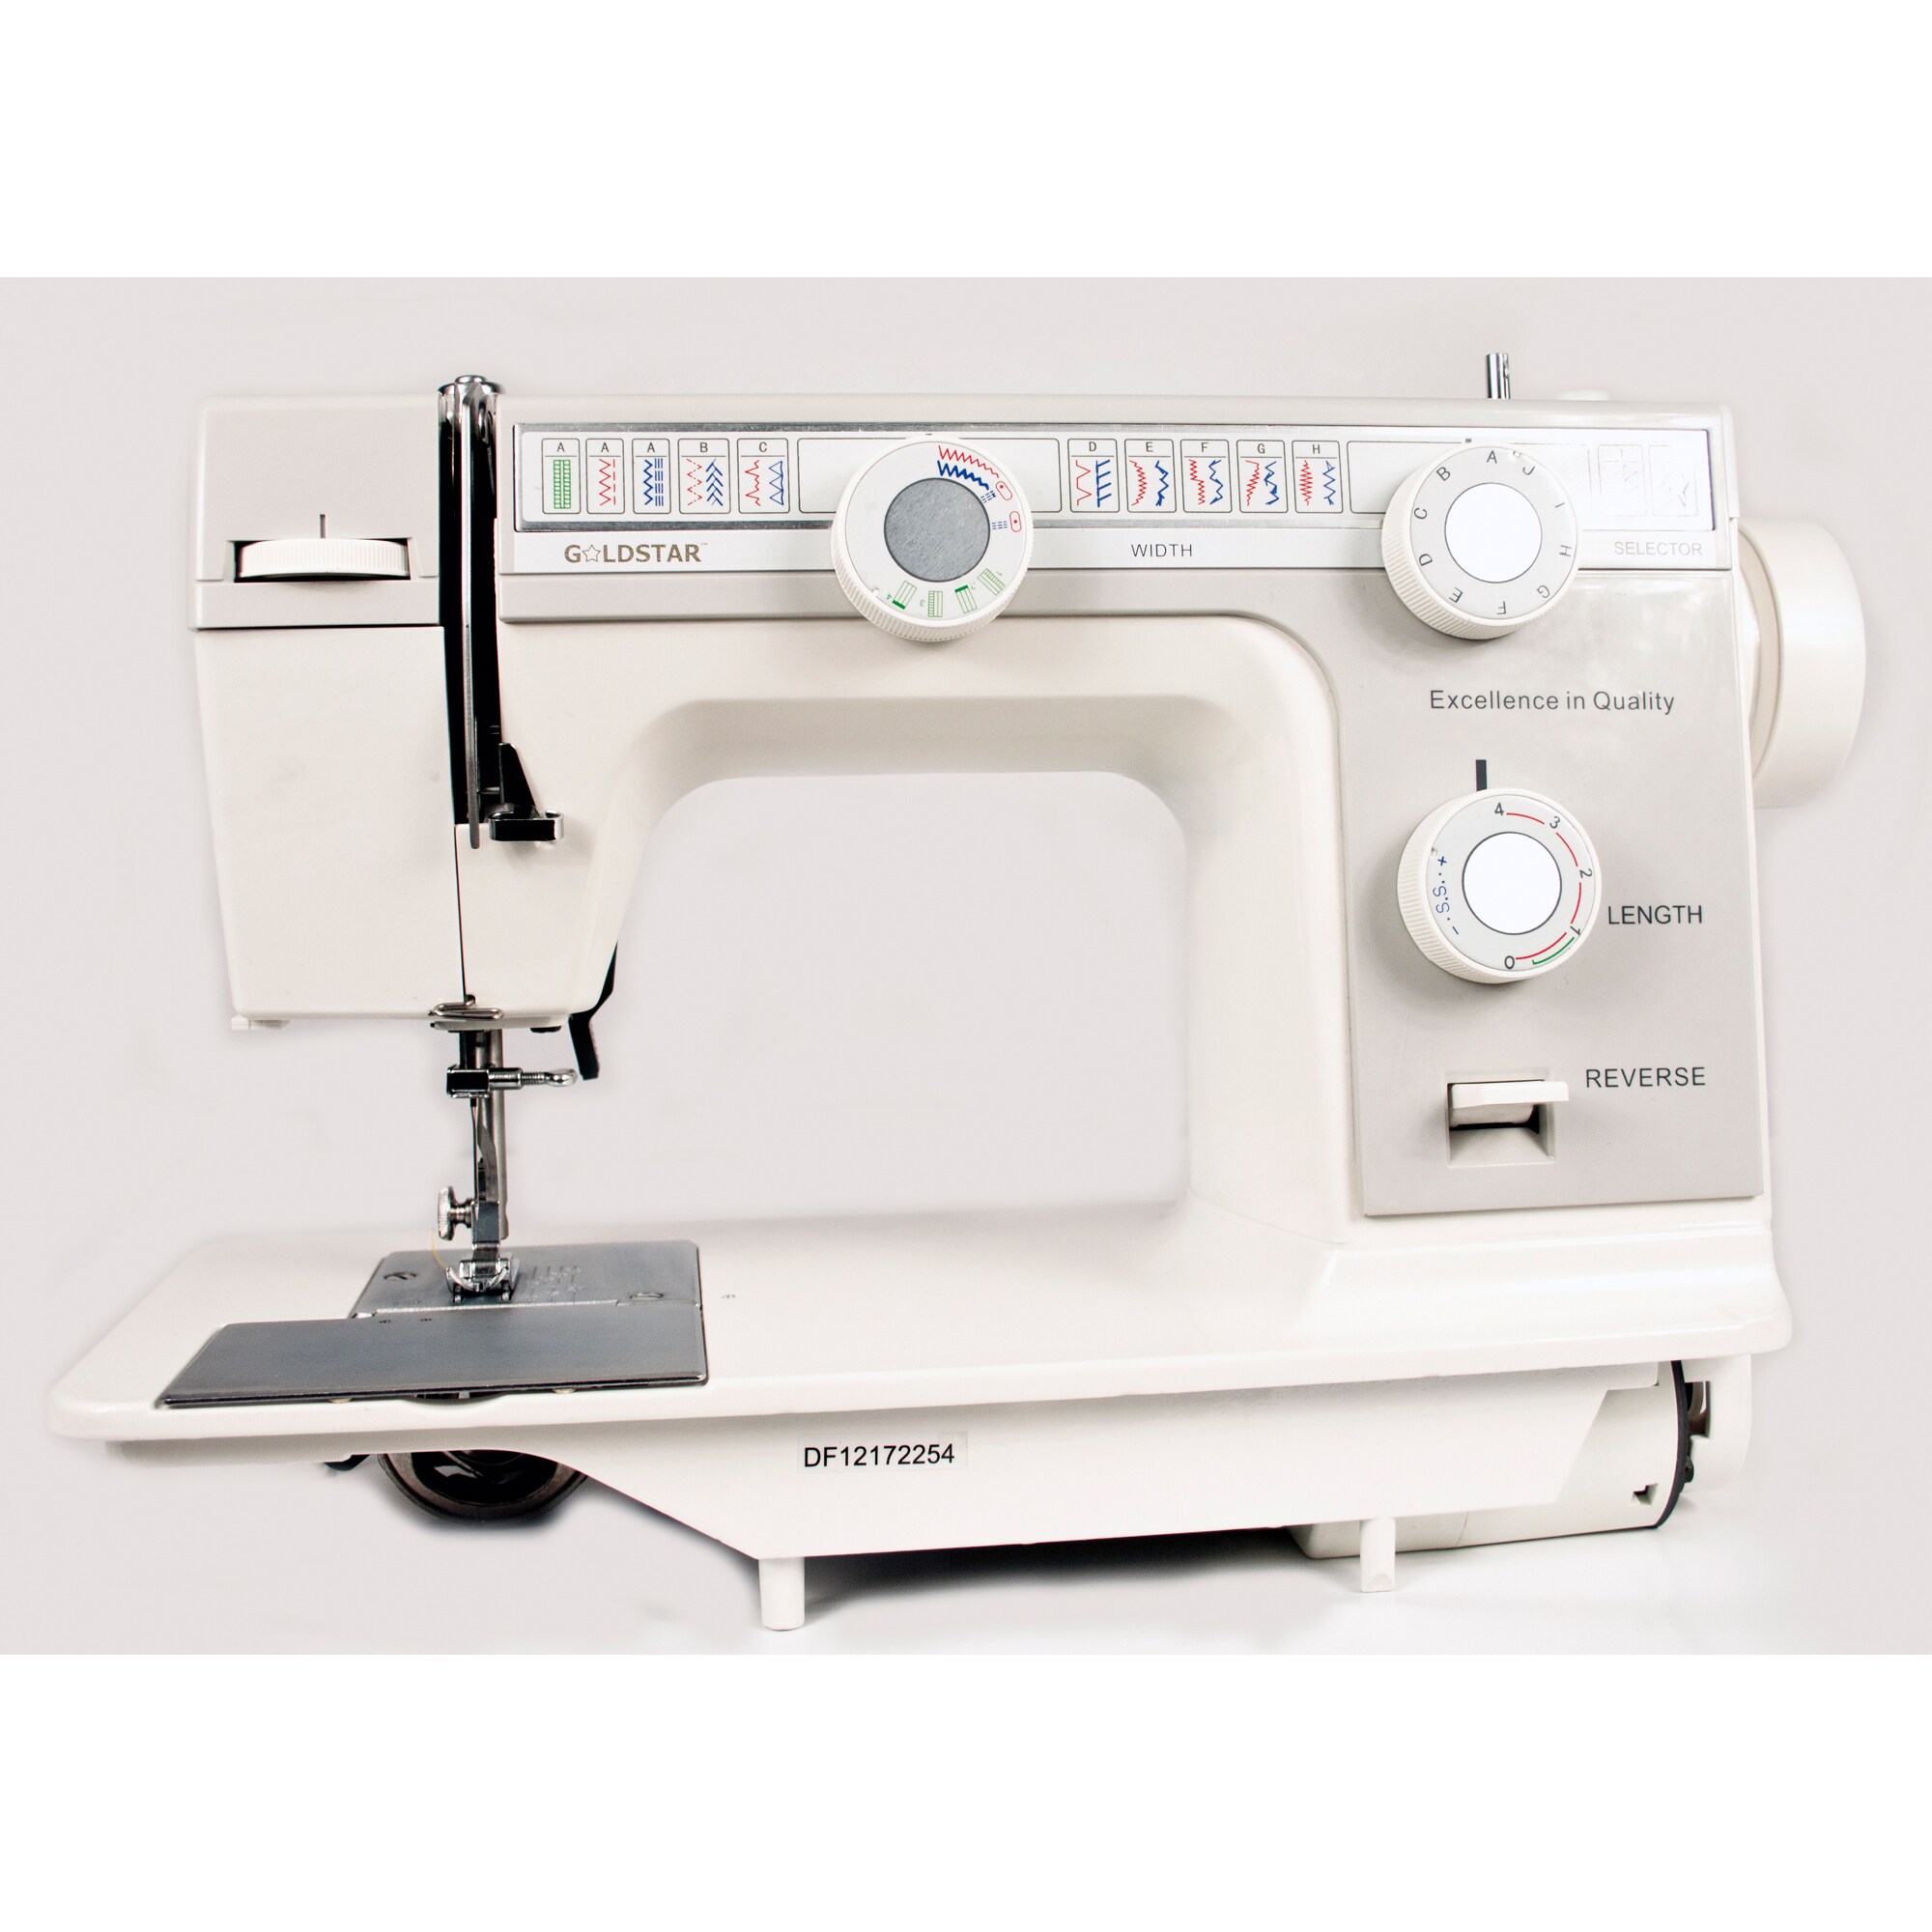 The Complete History of a Sewing Machine, GoldStar Tool